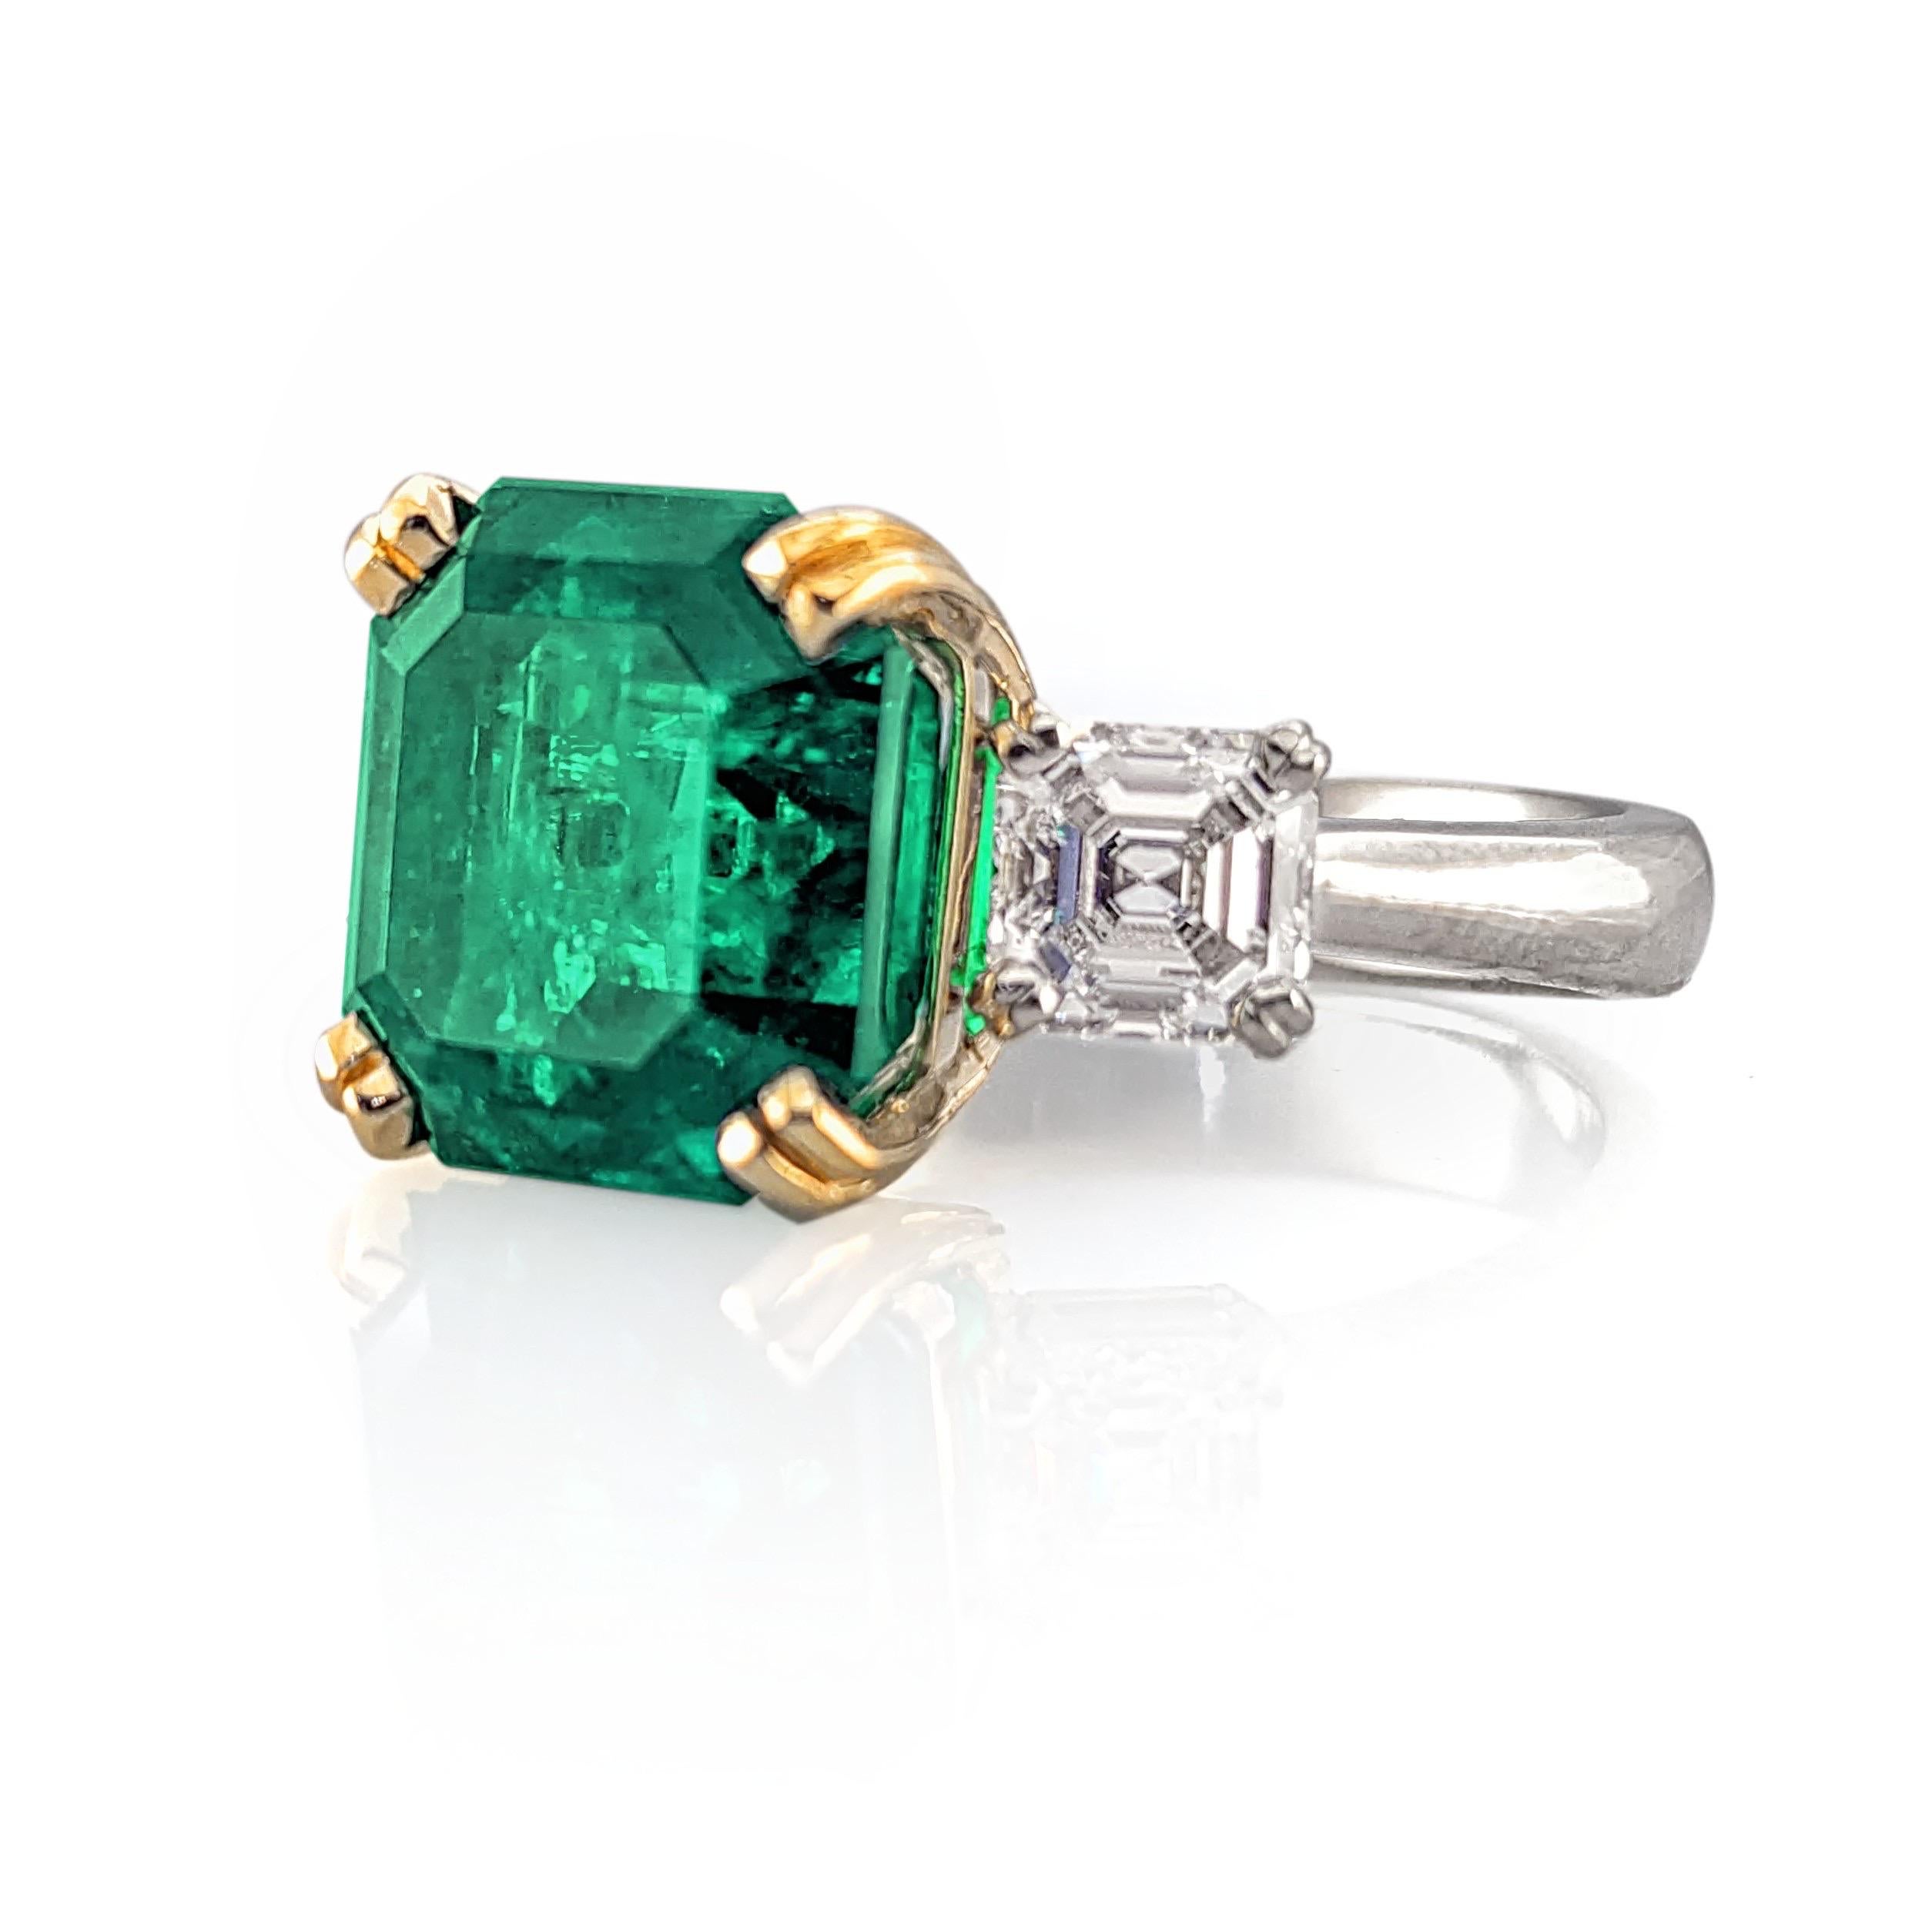 An incredibly rare traditional Colombian Emerald and Diamond ring!  The Emerald weighs 6.08 carats.  It is graded by American Gemological Laboratories as Natural Beryl, Colombian origin, and traditional type.  It is set in an eight pronged basket of